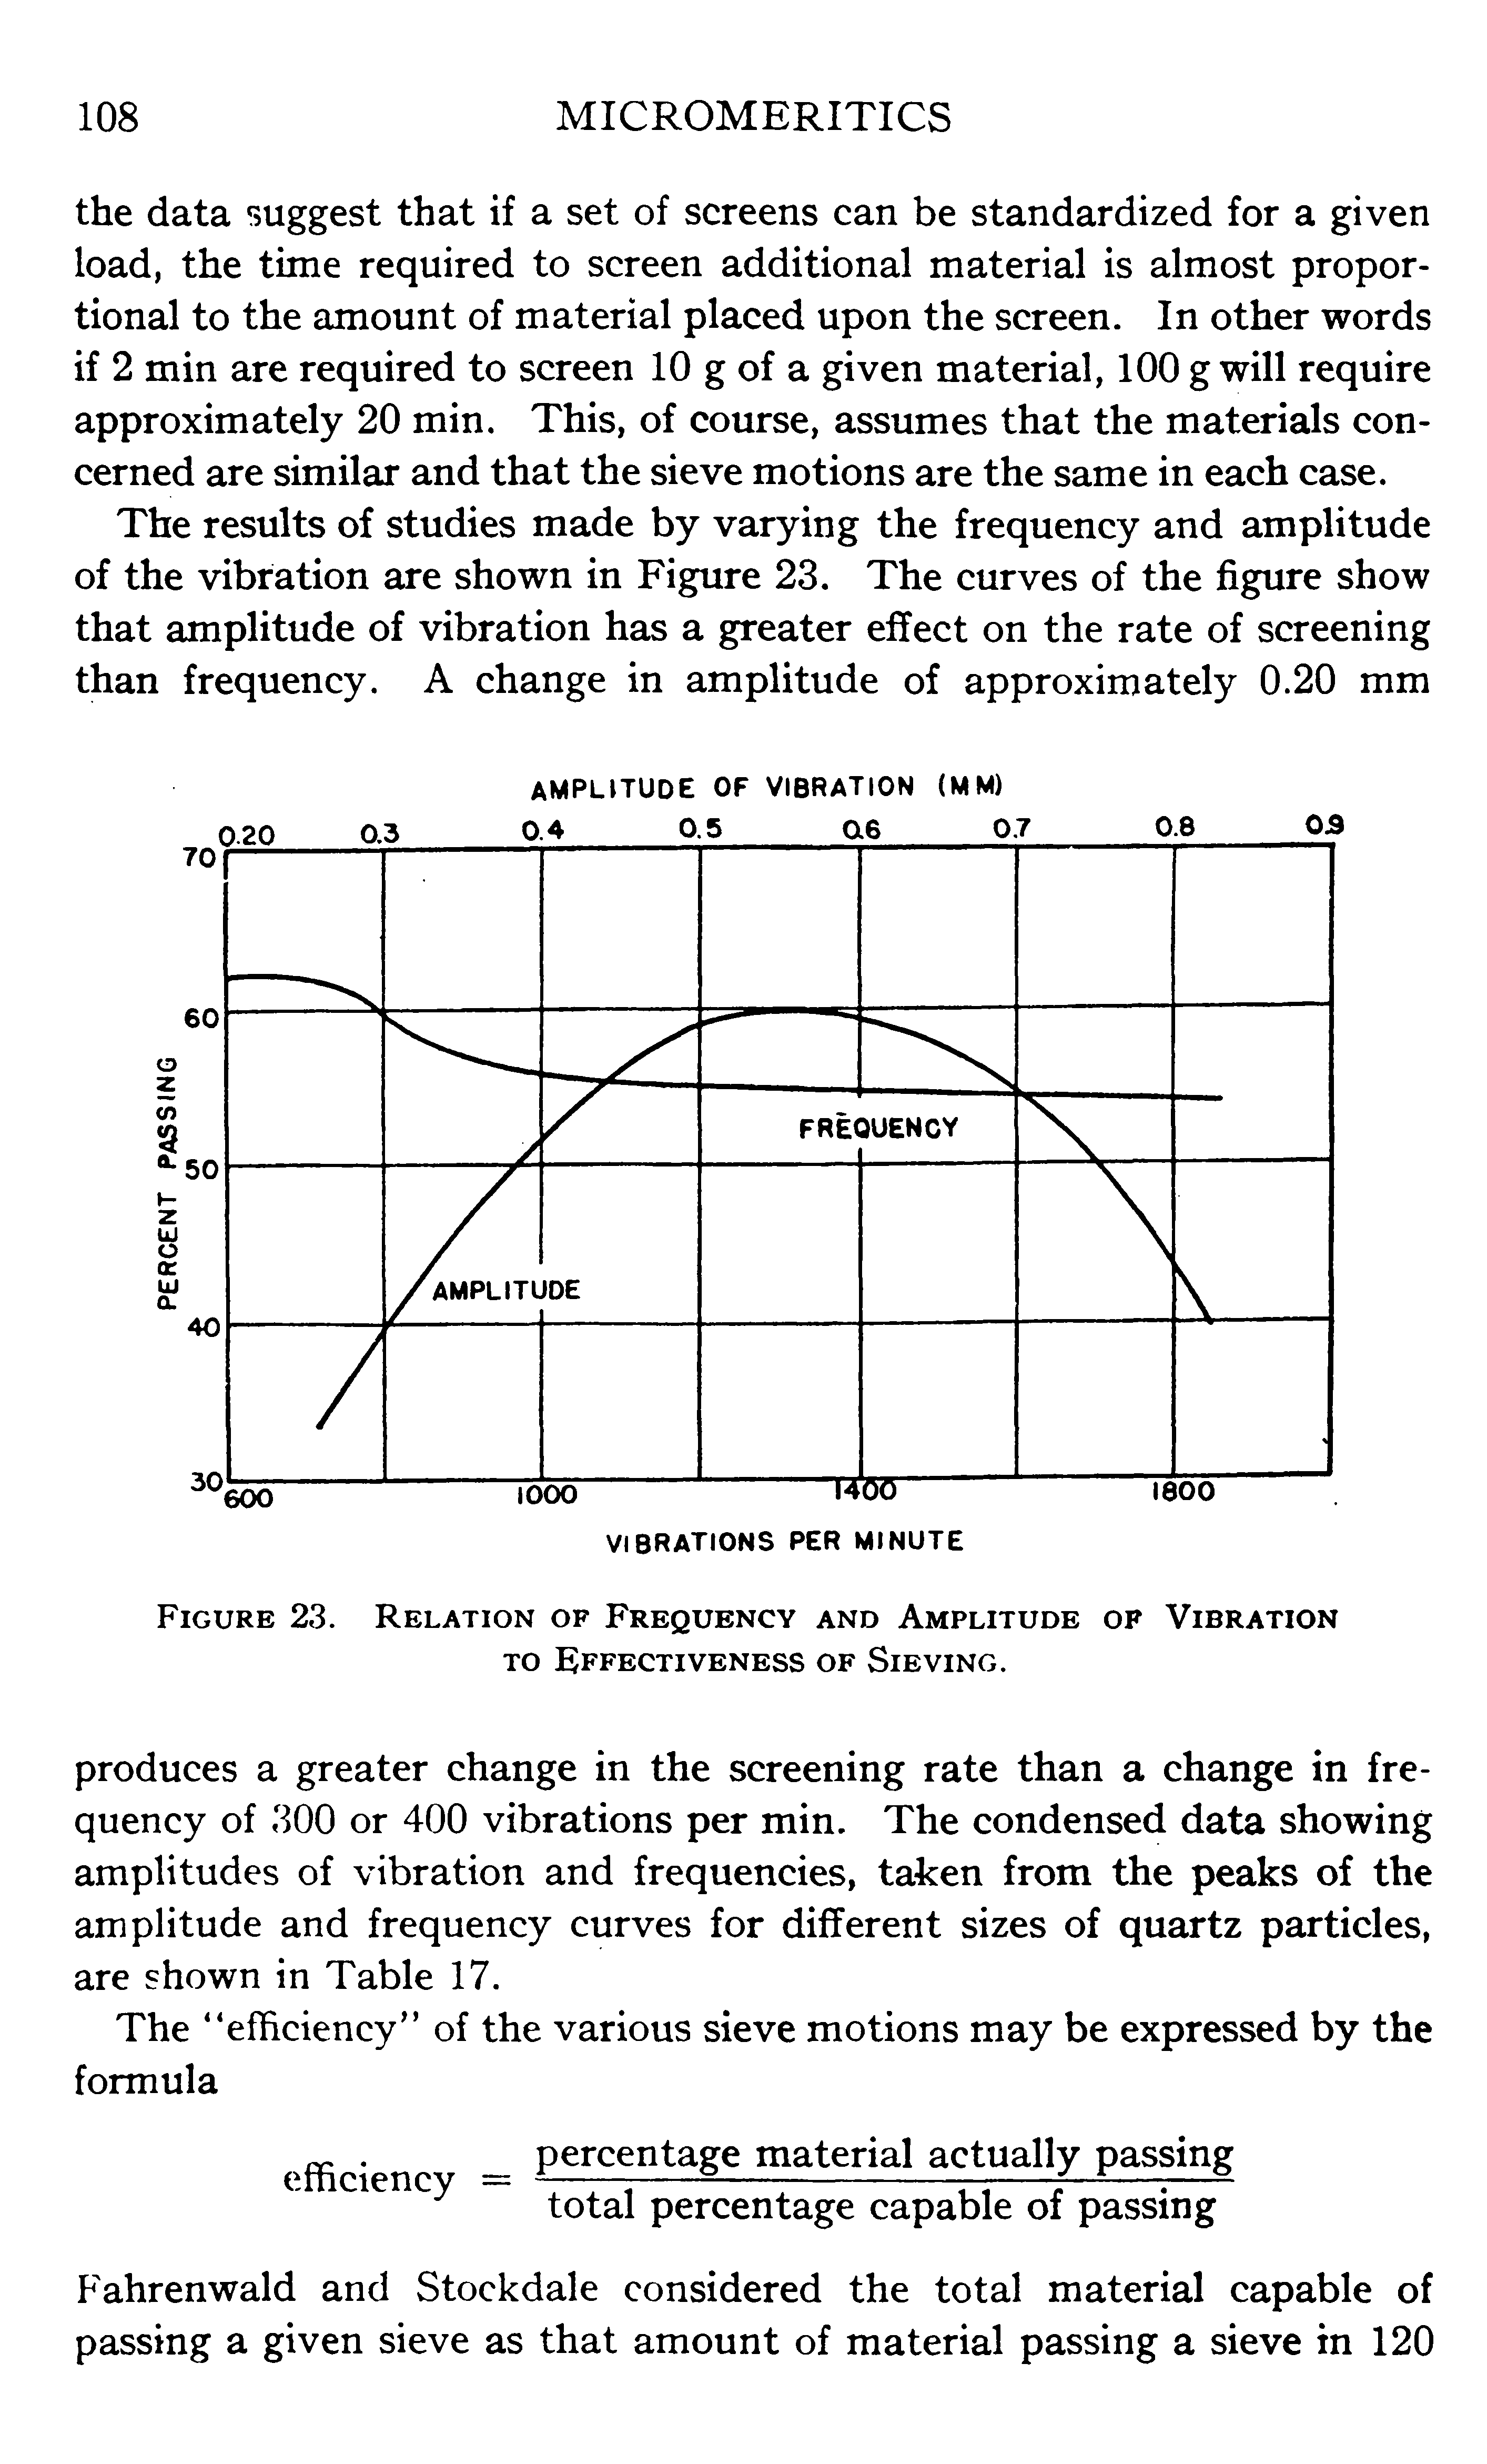 Figure 23. Relation of Frequency and Amplitude of Vibration to Effectiveness of Sieving.